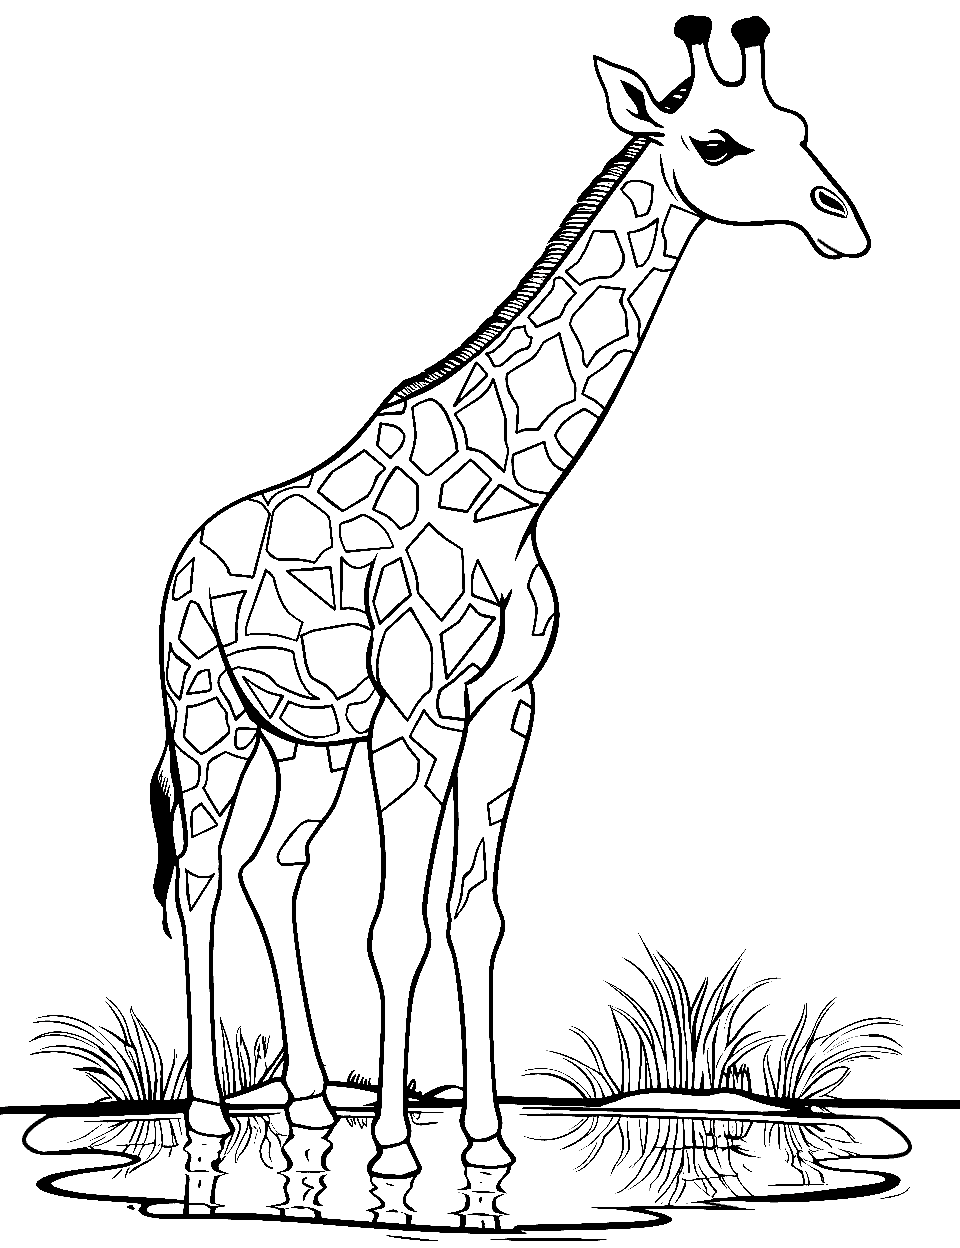 Giraffe Reflection Coloring Page - A giraffe drinking water with its reflection clear in the water.